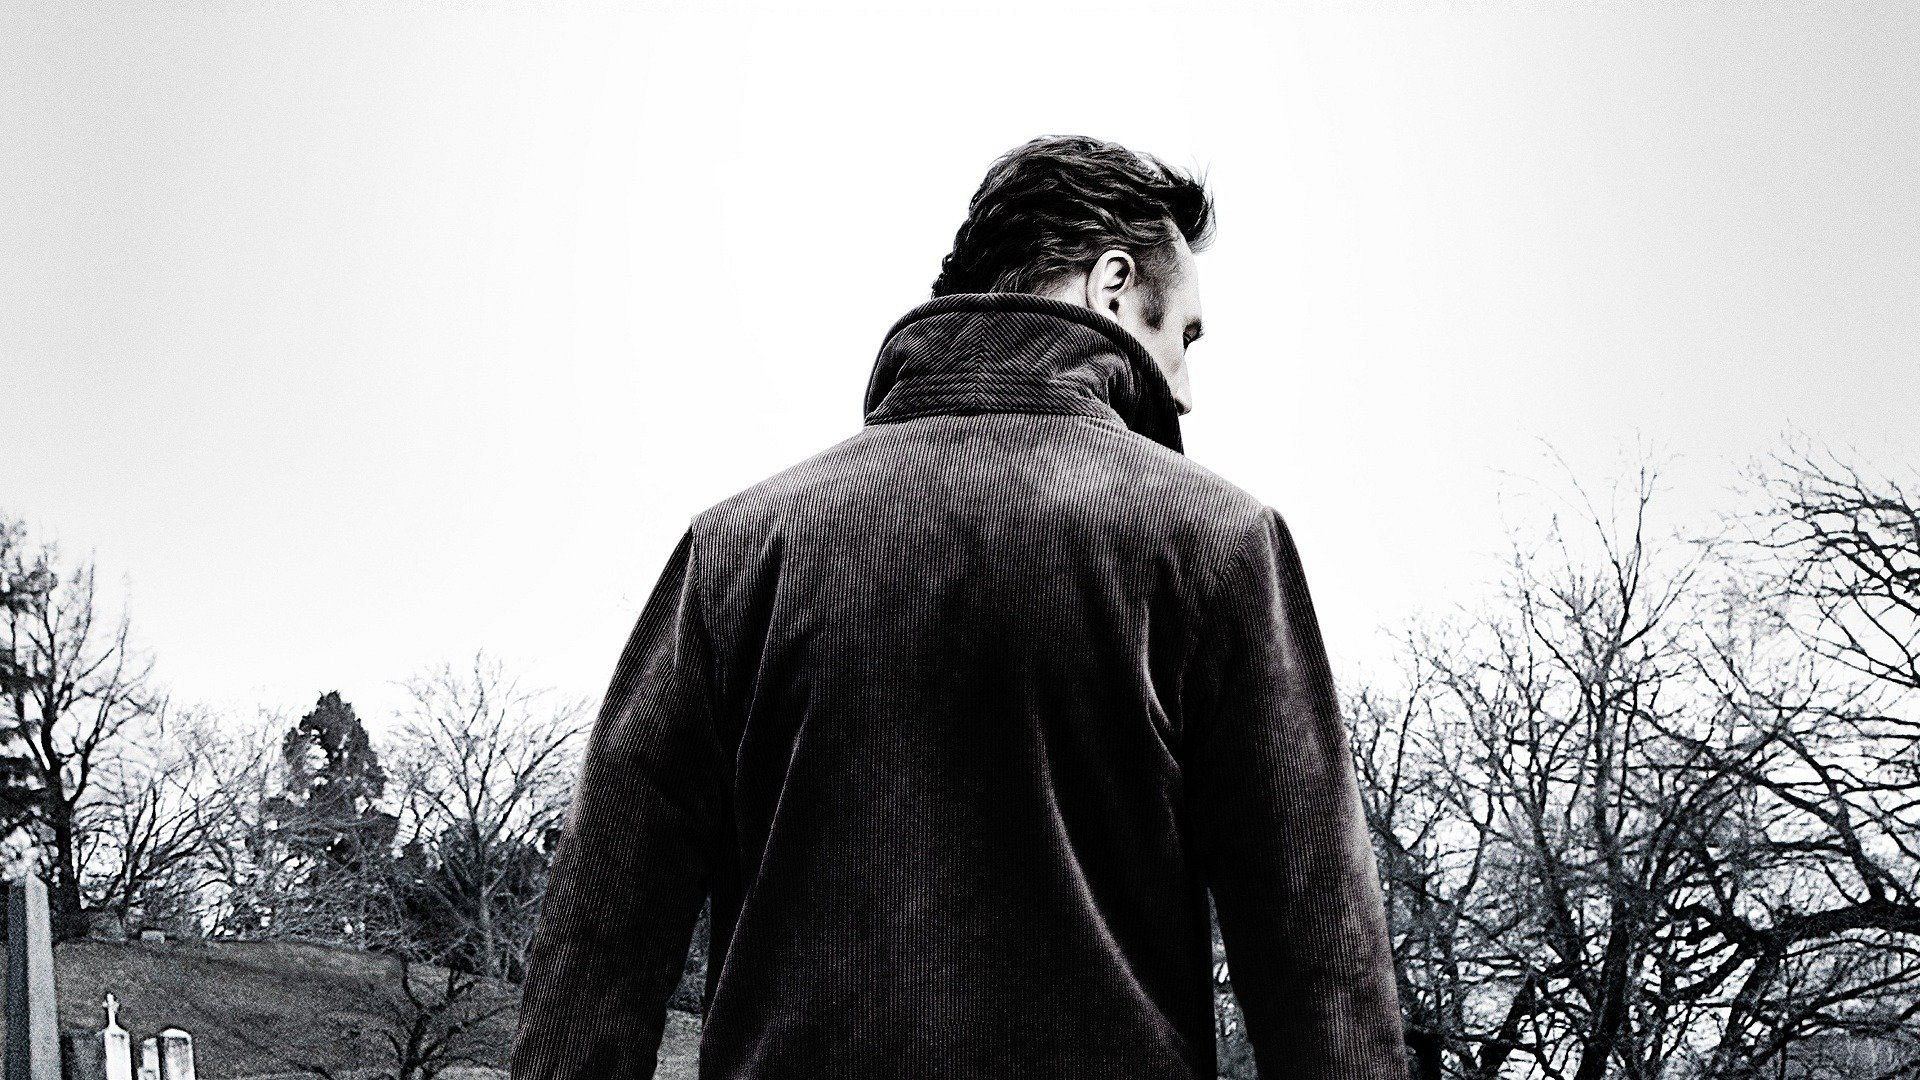 A walk among the Tombstones